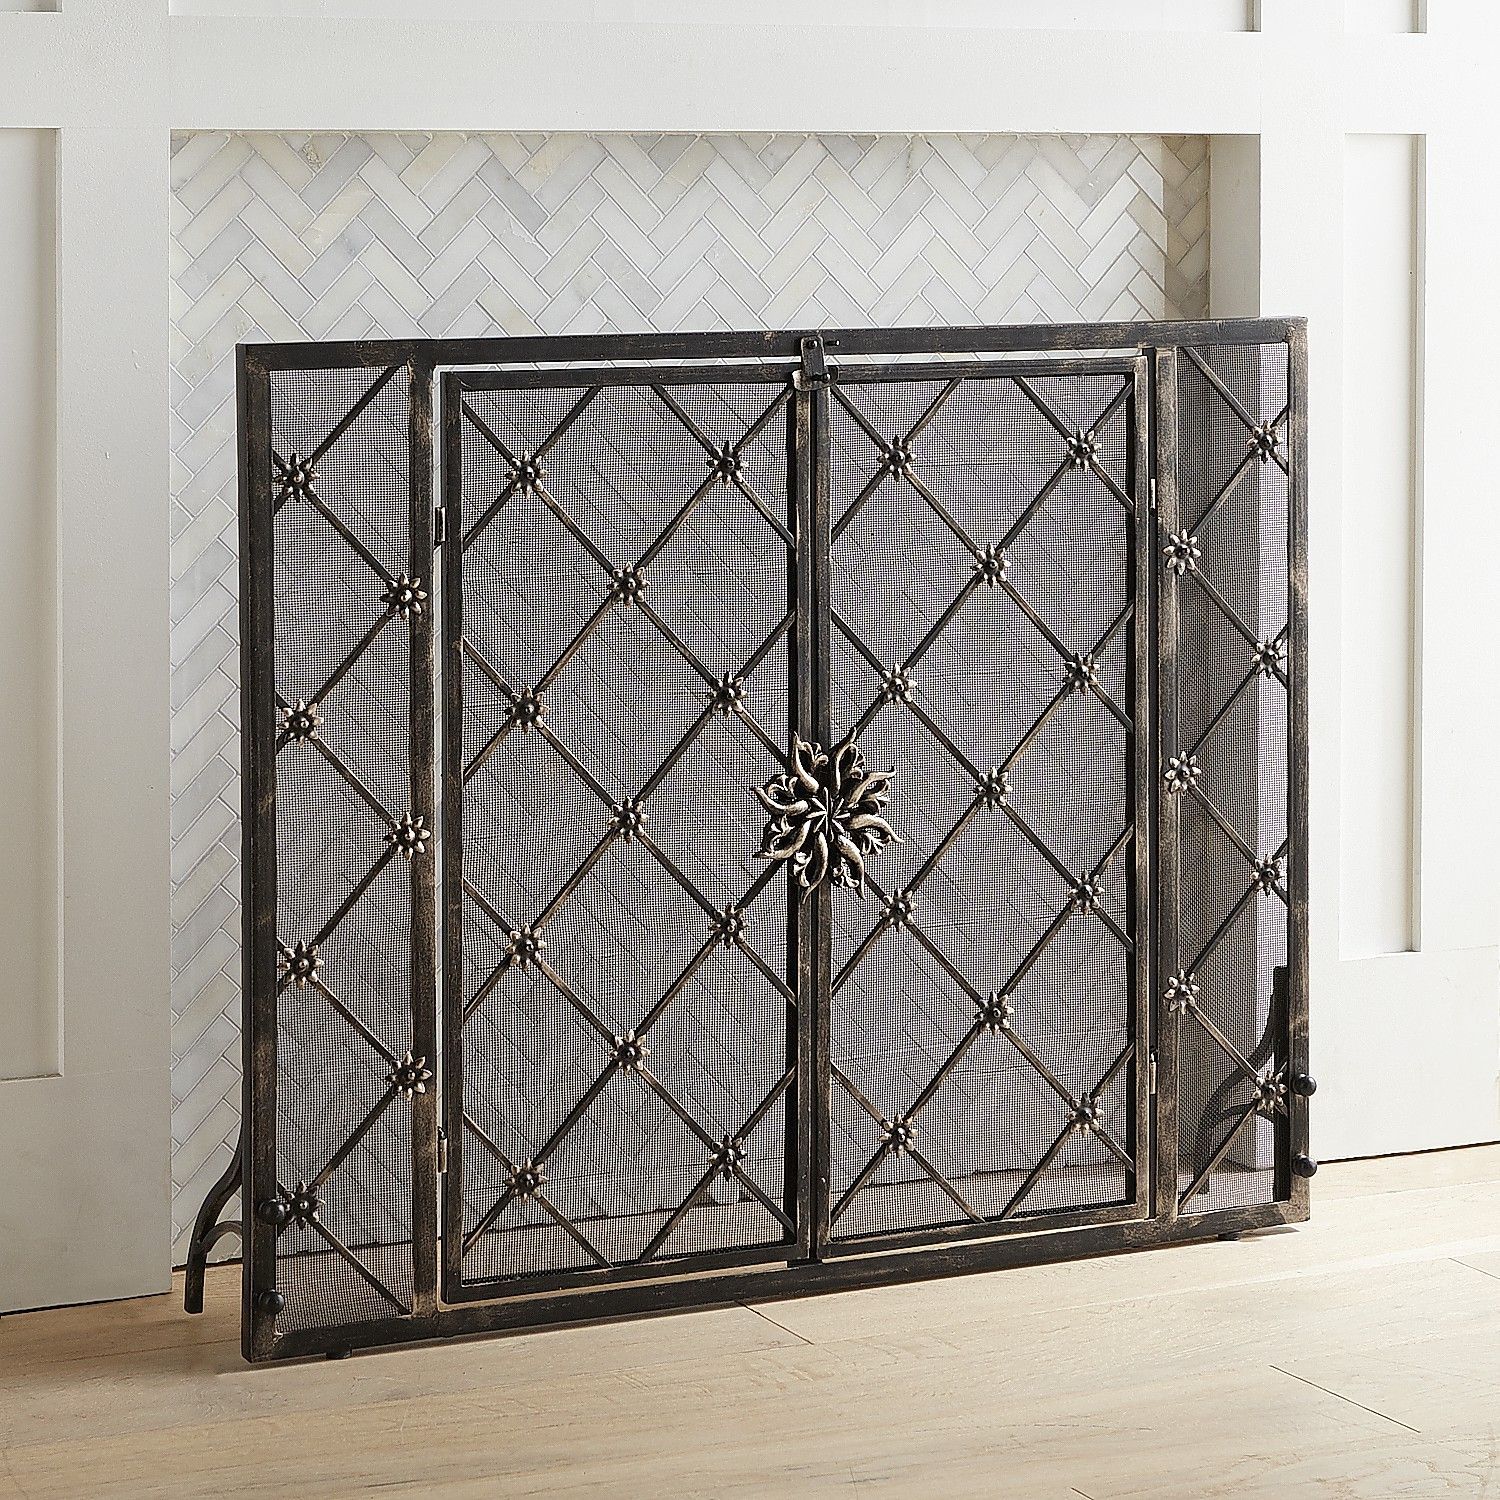 Modern Fireplace Screen Best Of Junction Fireplace Screen In 2019 Products